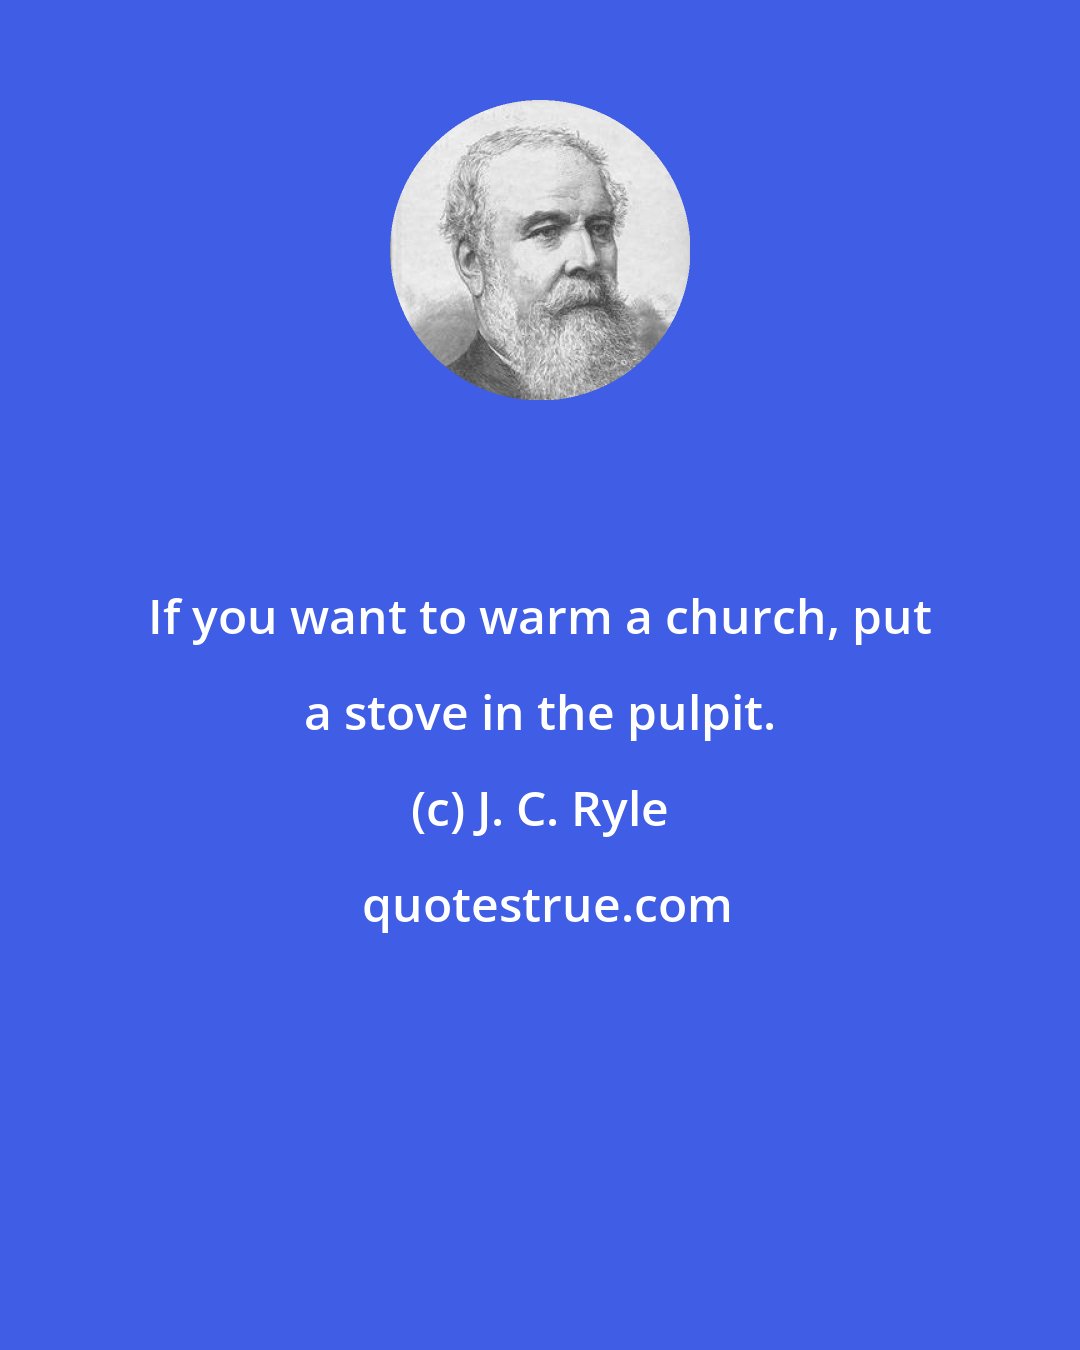 J. C. Ryle: If you want to warm a church, put a stove in the pulpit.